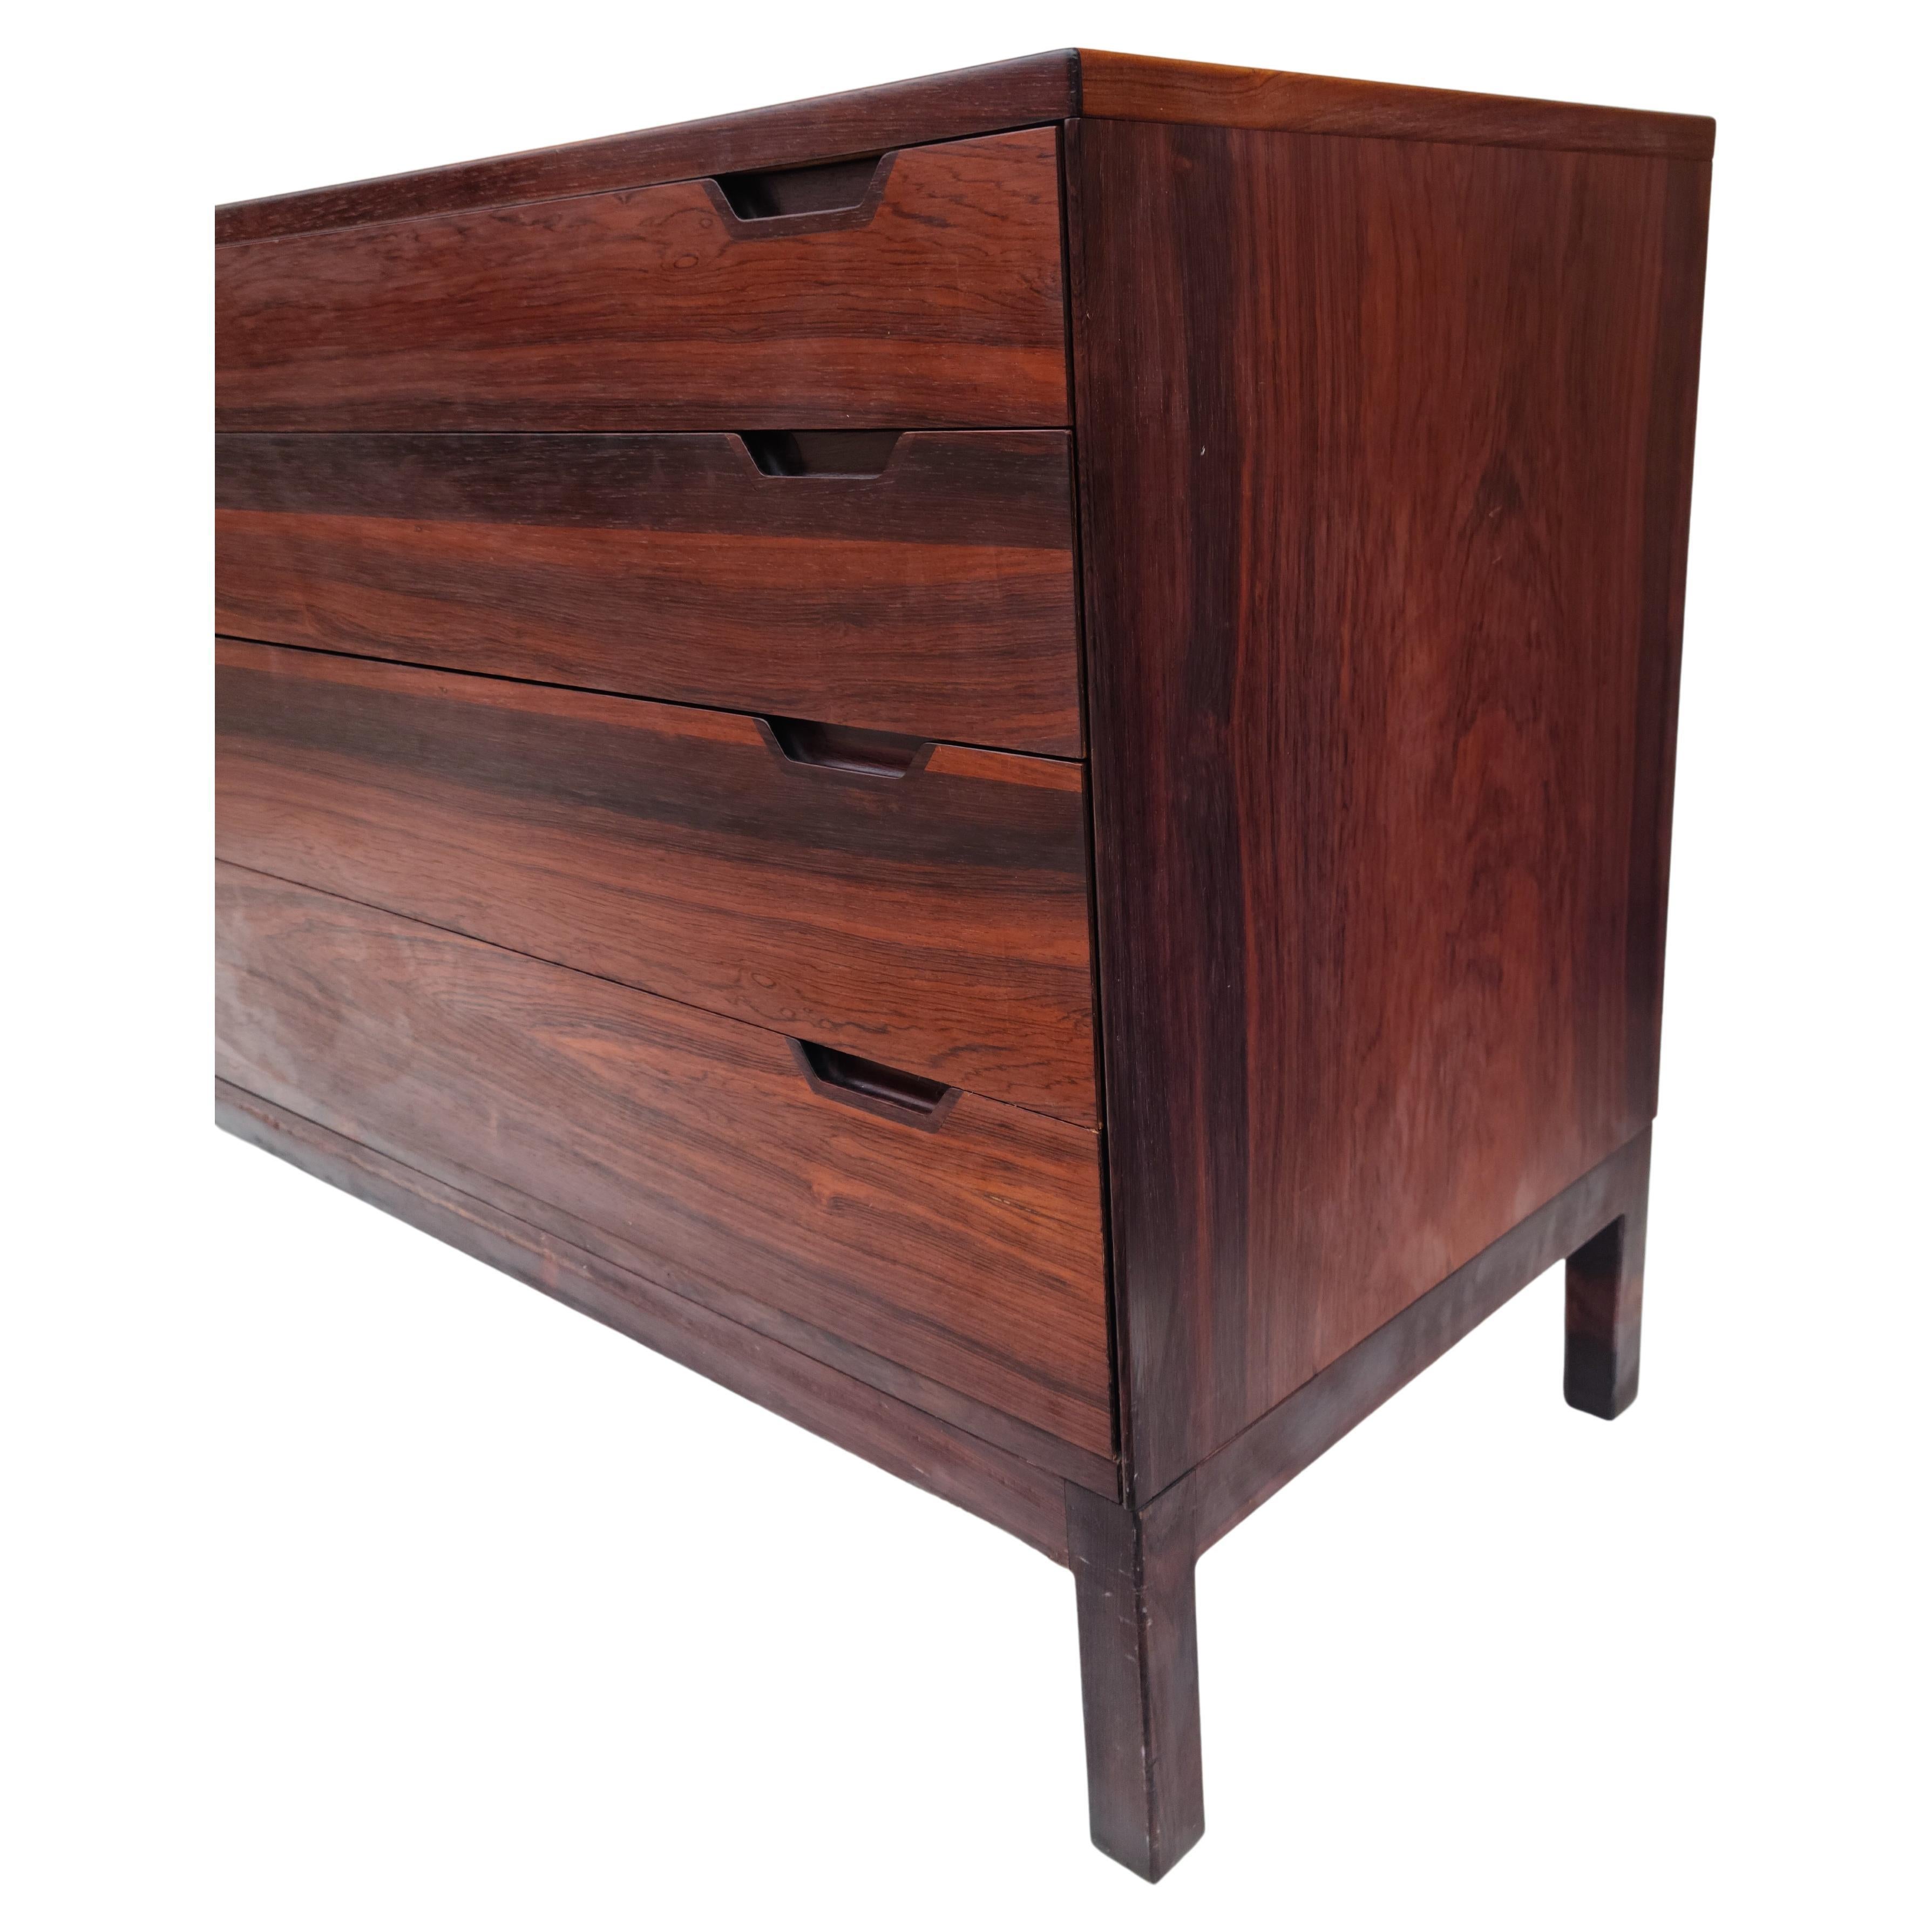 Mid-20th Century Danish Rosewood 8 Drawer Chest by Svend Langkilde Mobler Denmark For Sale